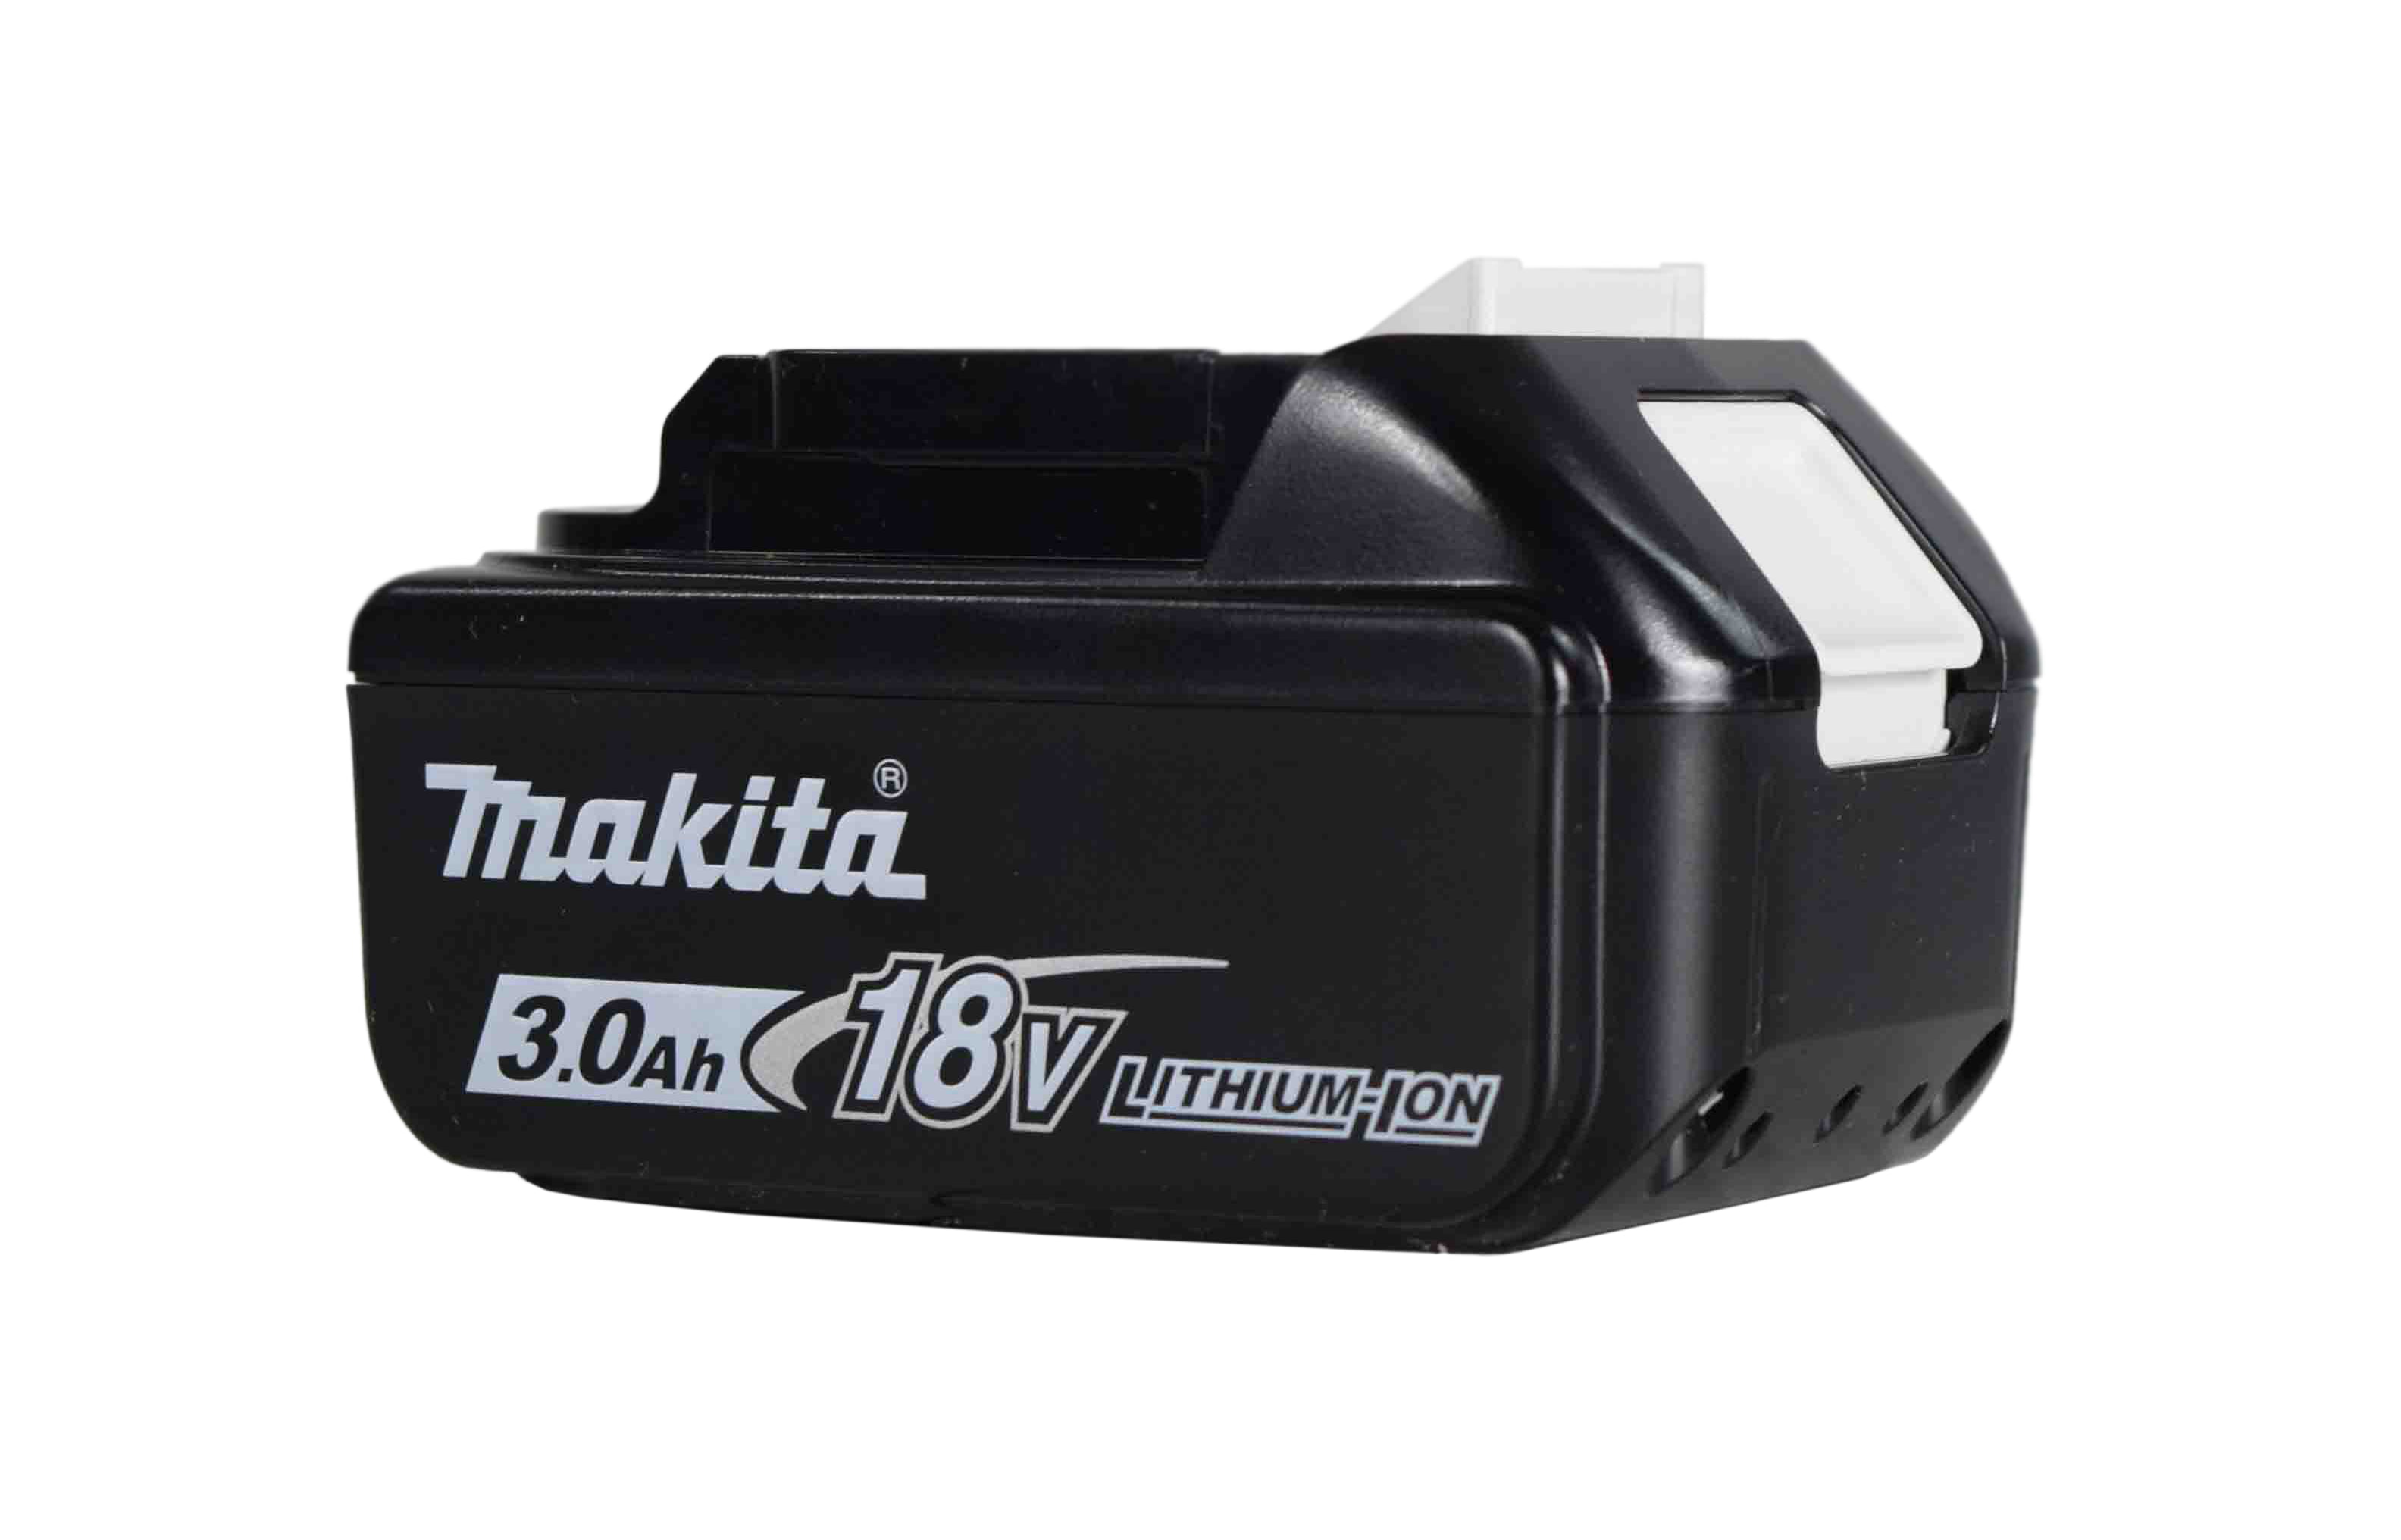 Makita 18V Lithium-Ion Battery Packs 3.0Ah with Fuel Gauge BL1830B - pack -